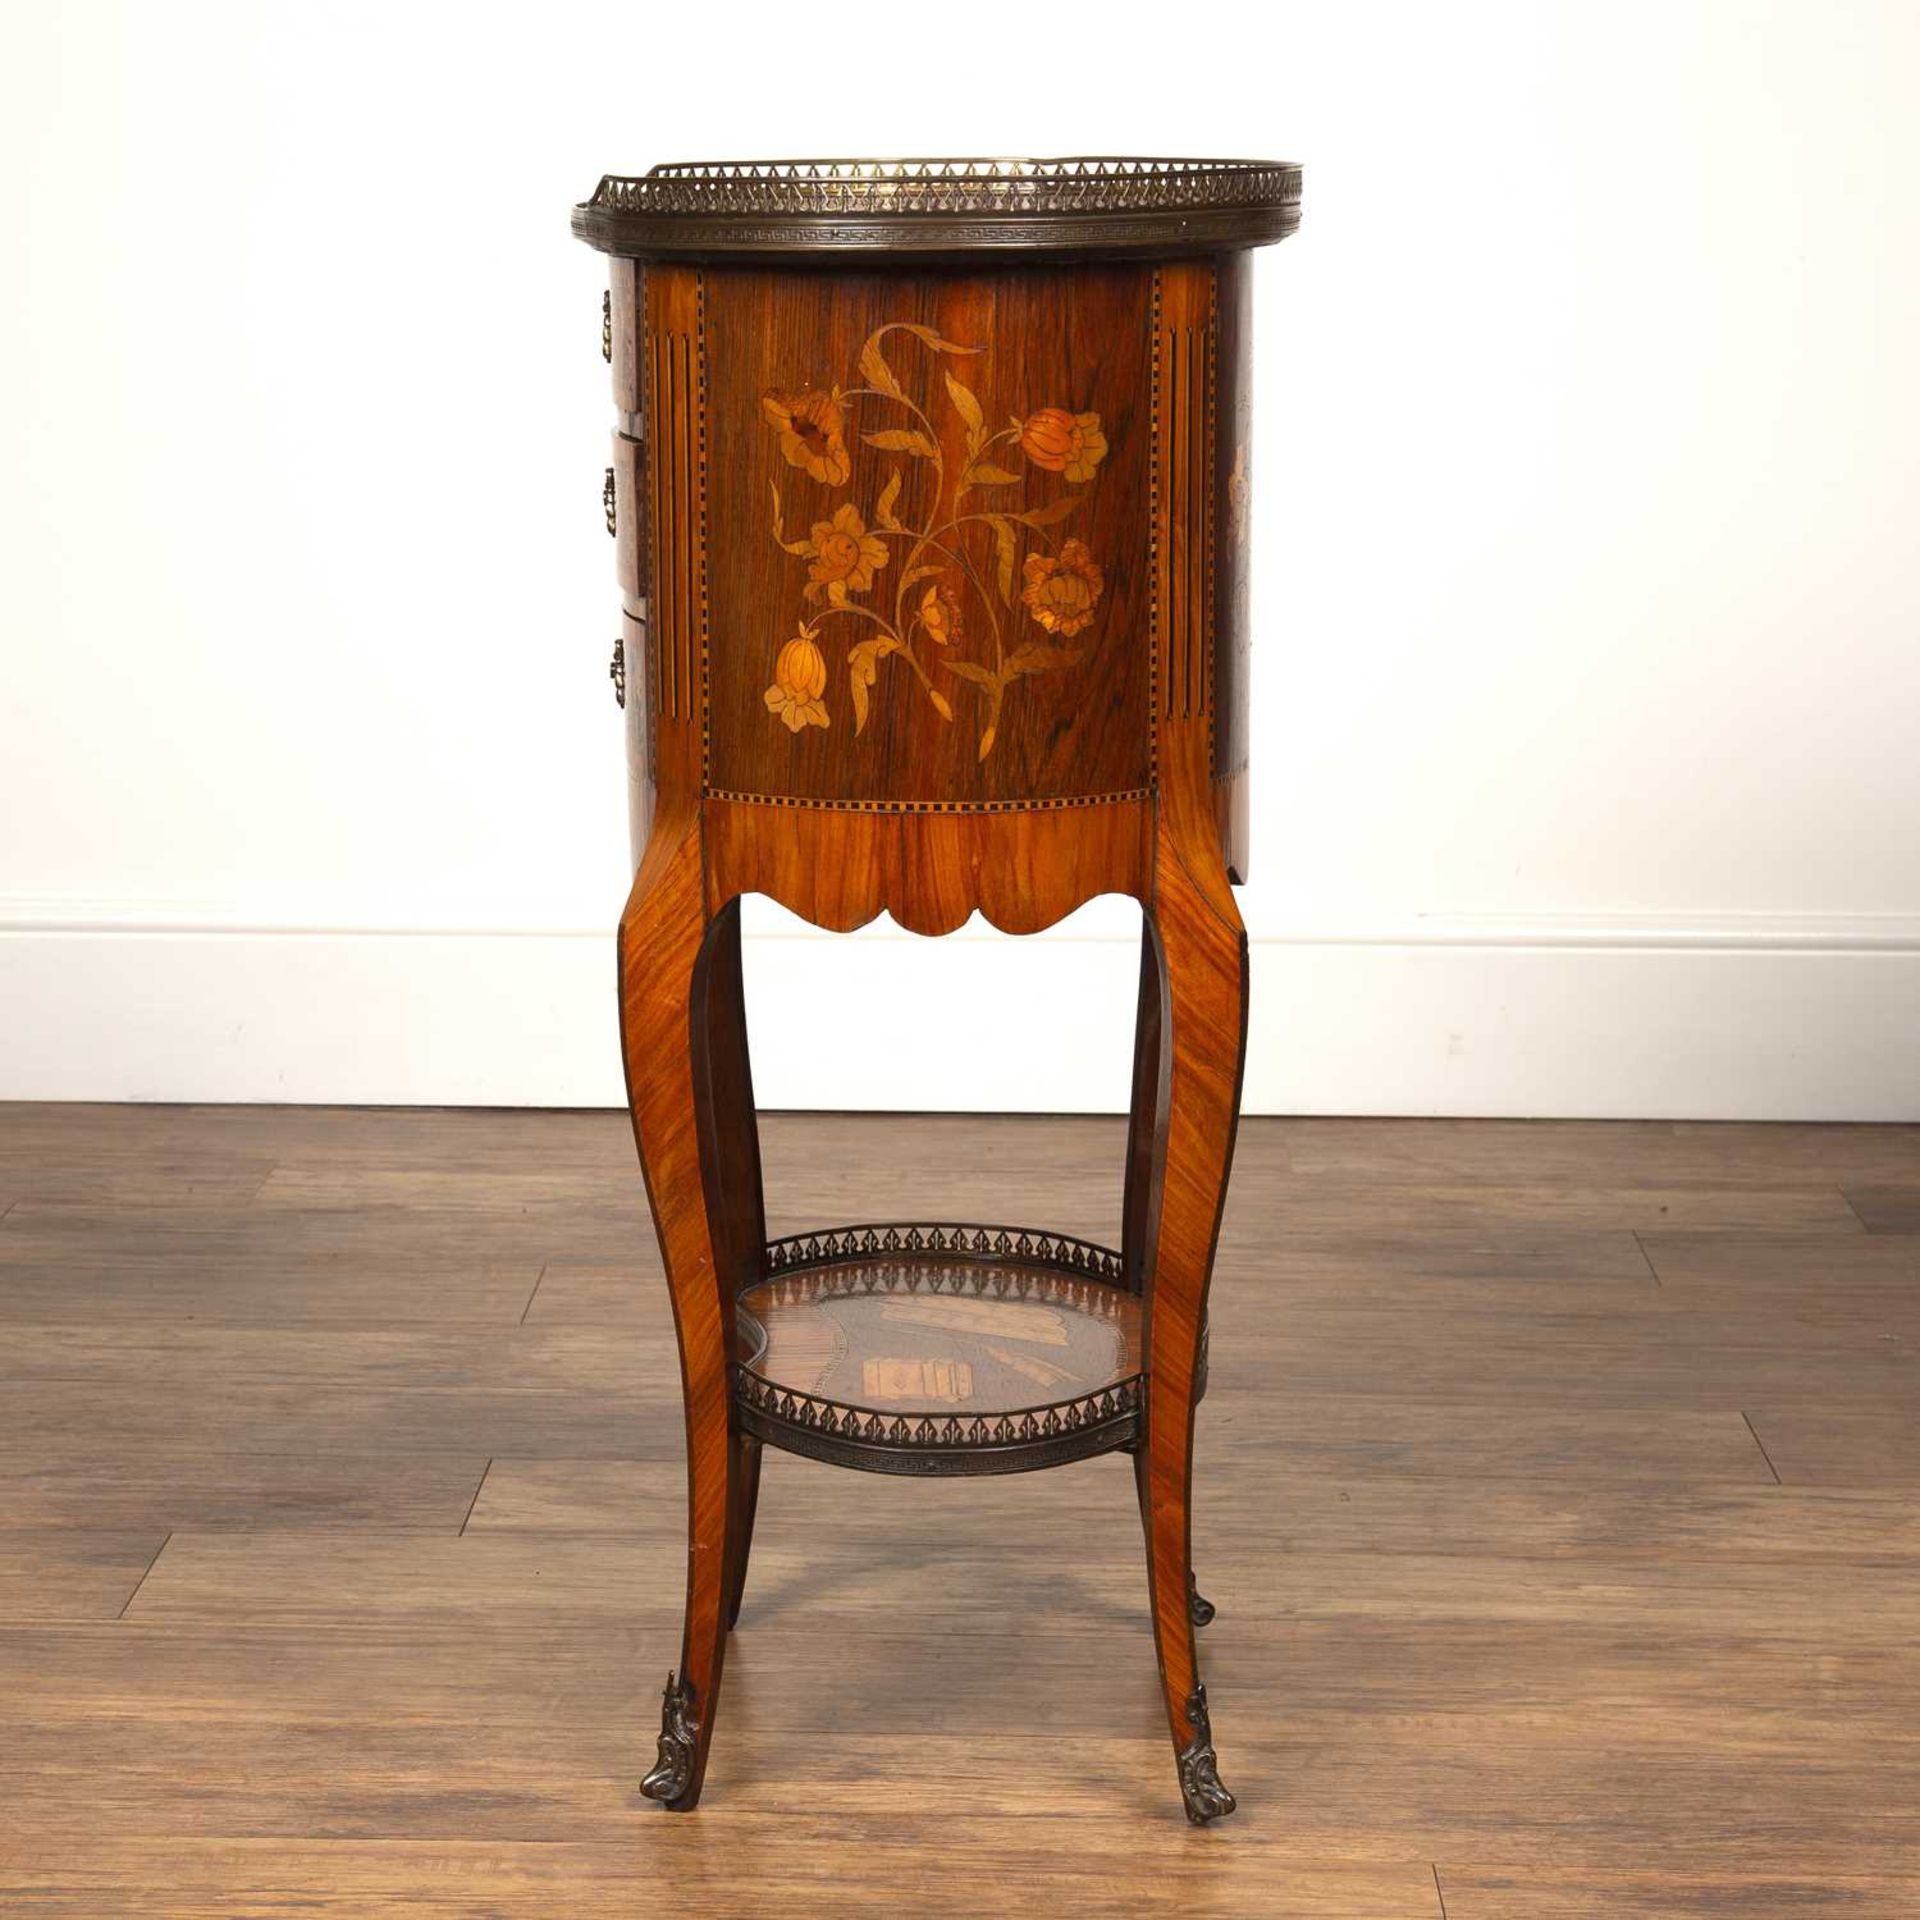 French marquetry side table of oval form, 19th Century, with brass galleried top, the top inlaid - Image 6 of 7